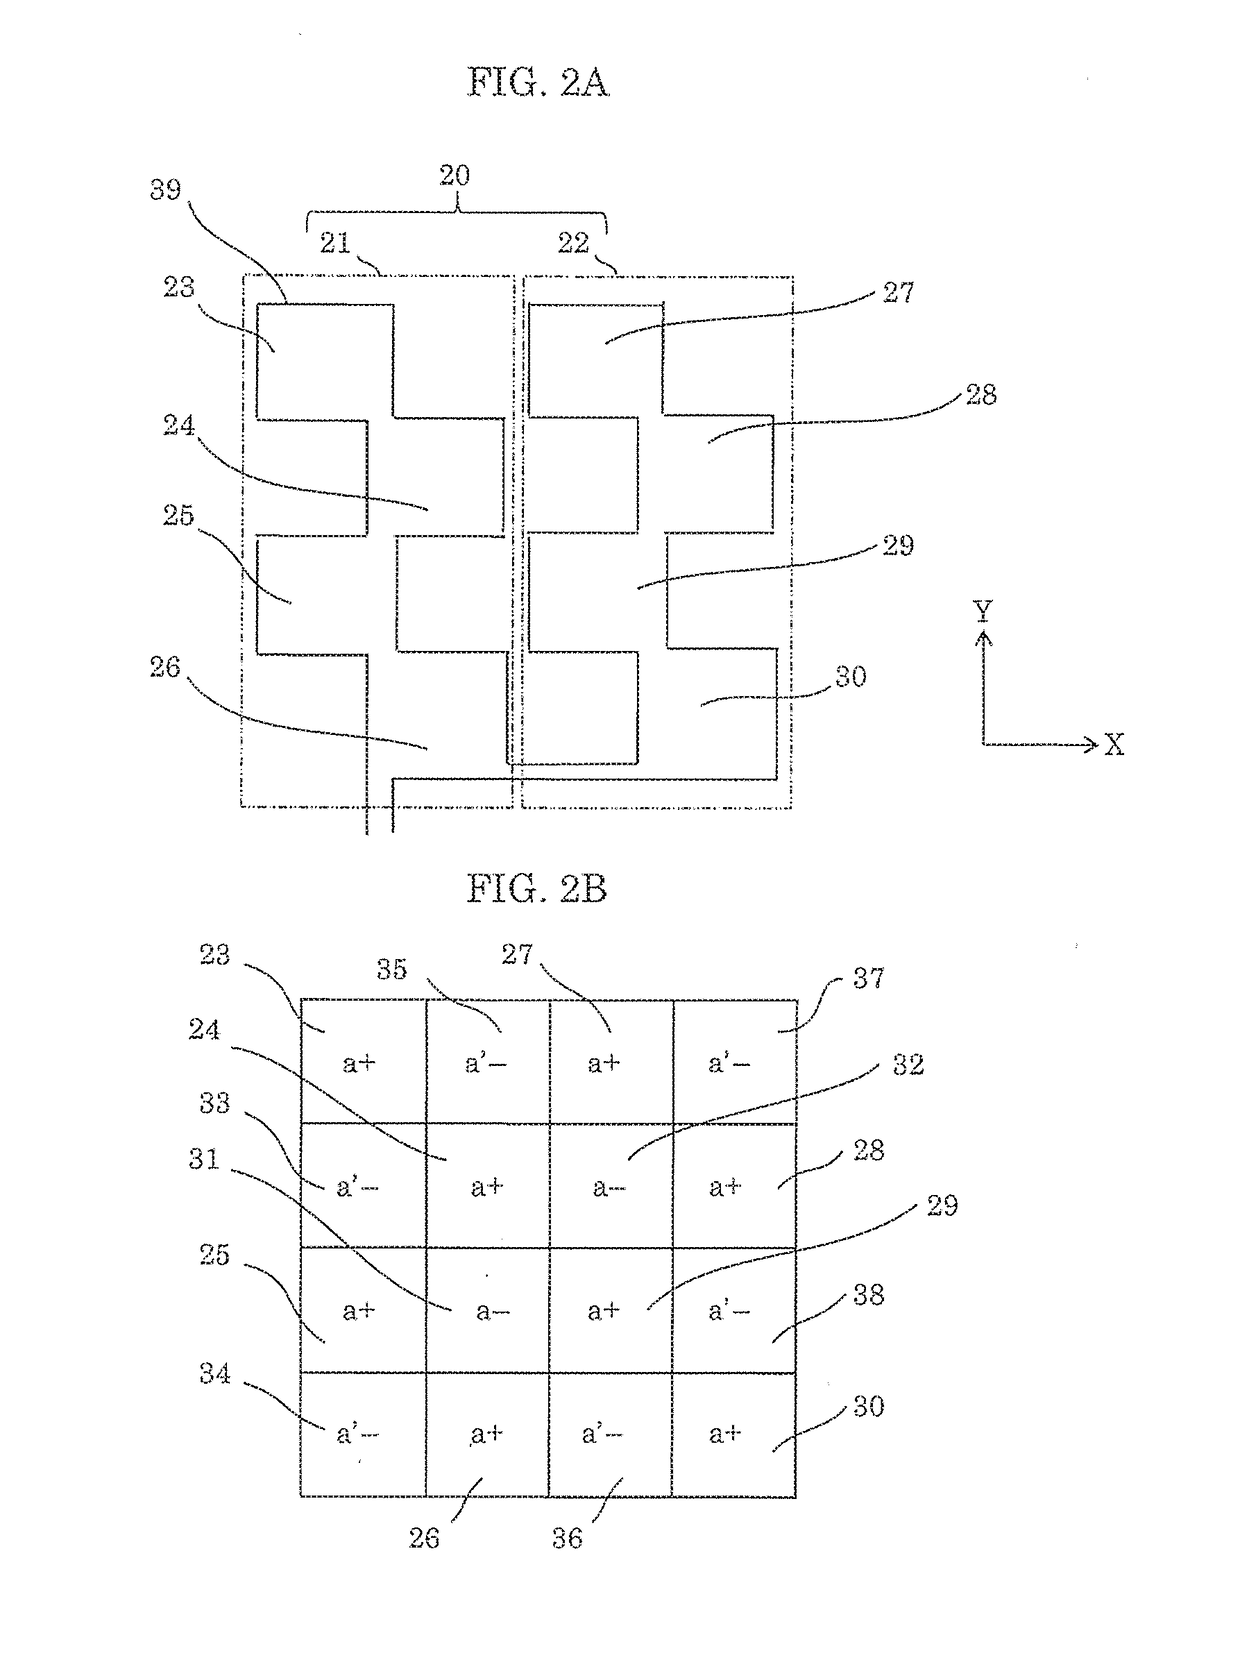 Foreign object detection device